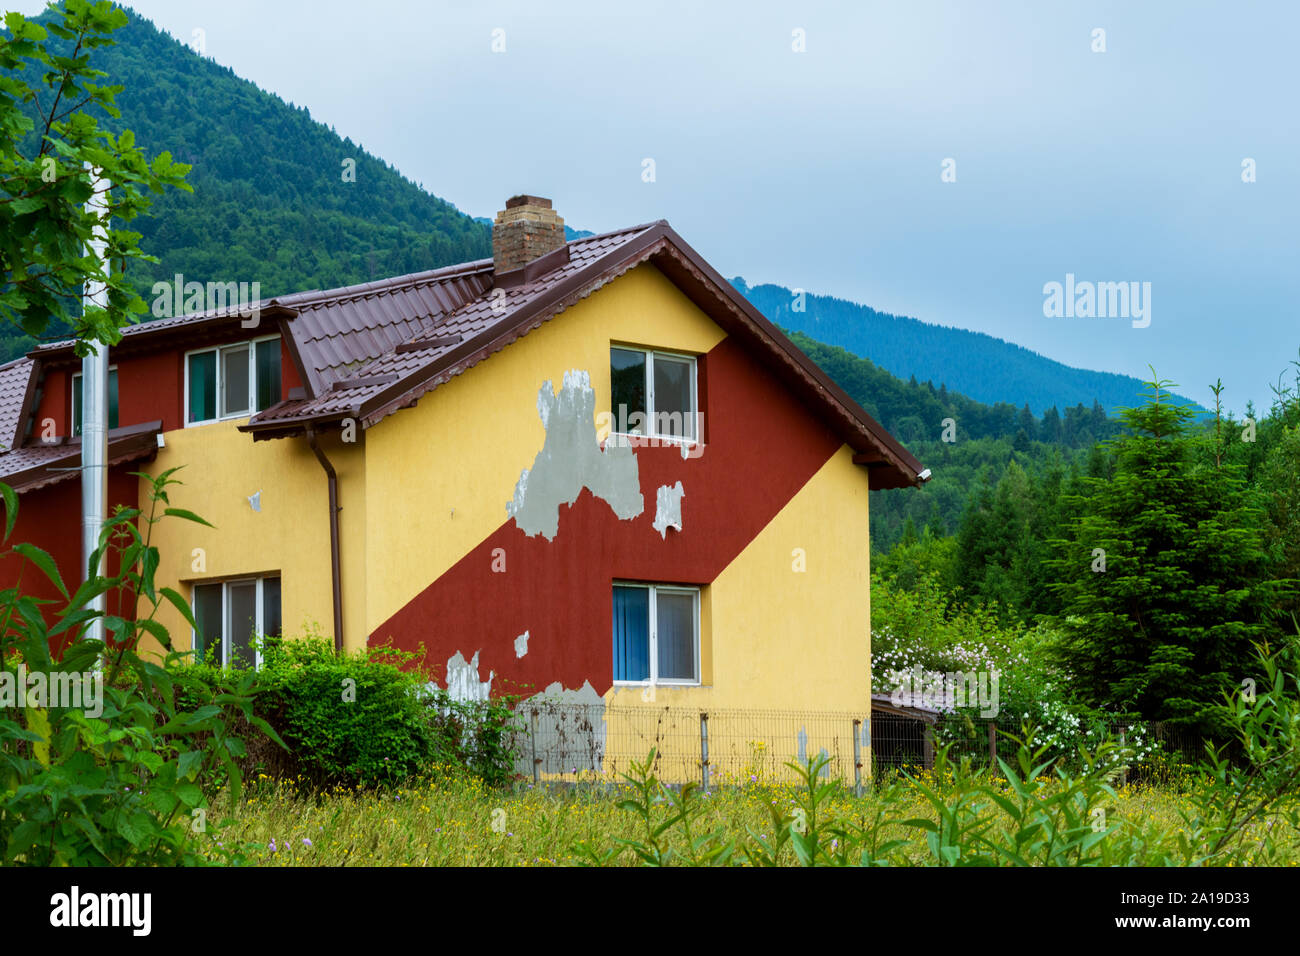 deteriorated modern house facade paint needs repairing for cosmetic purposes Stock Photo